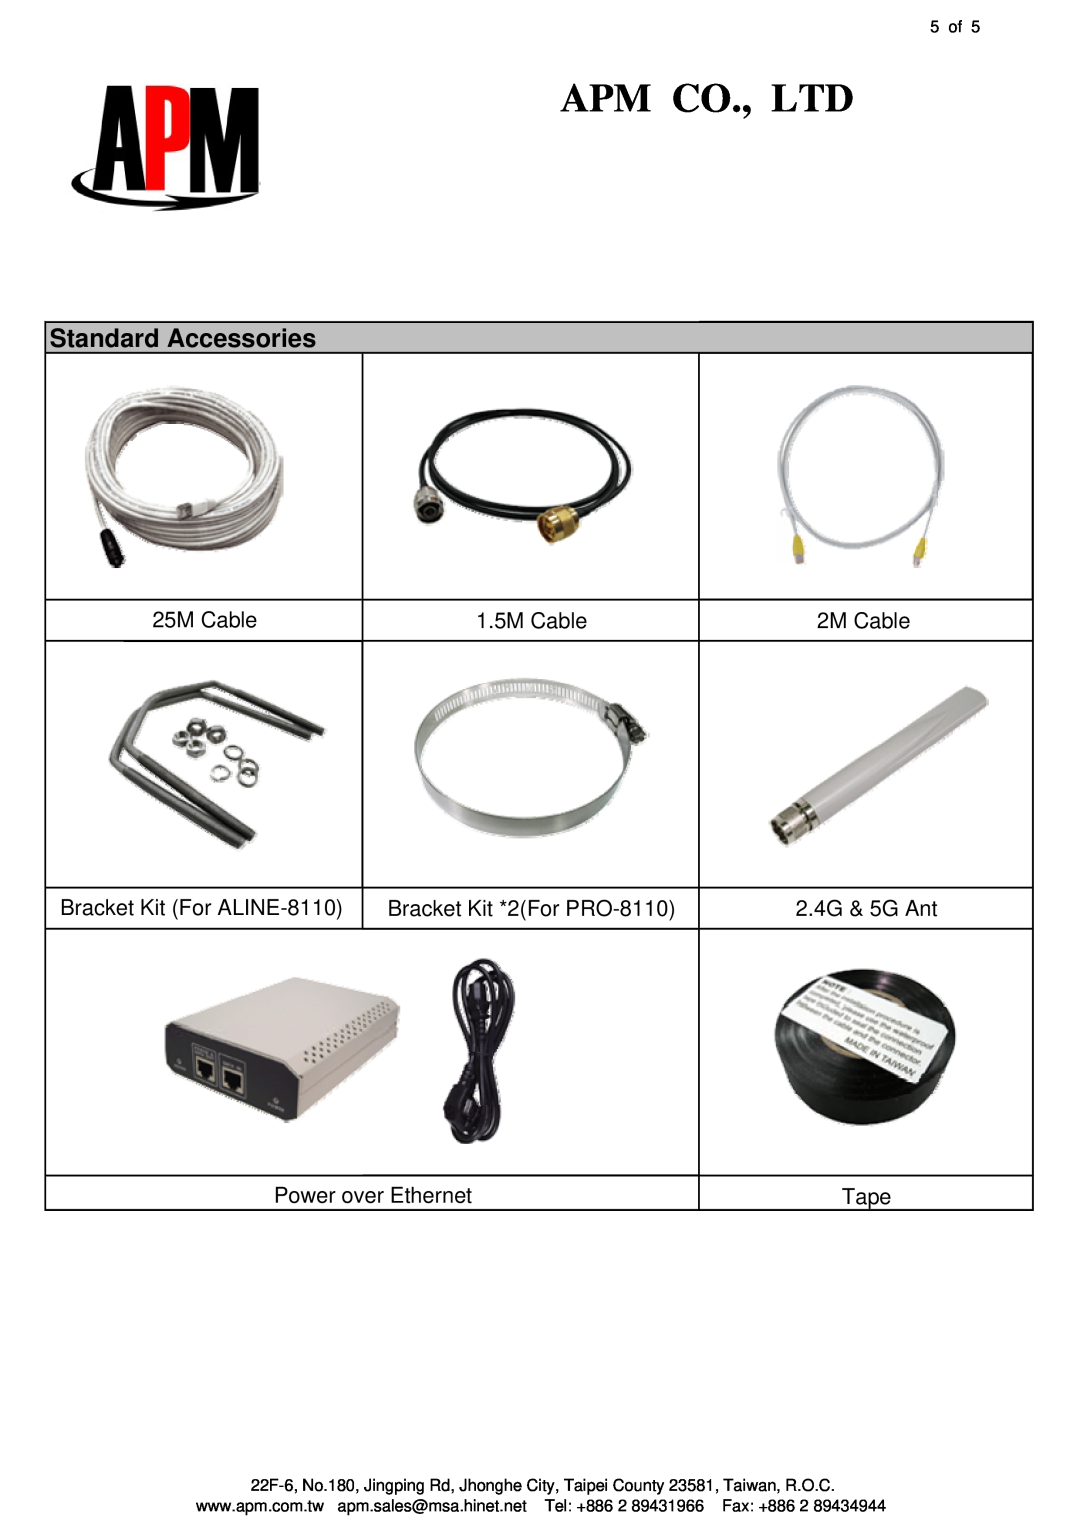 APM Standard Accessories, 25M Cable, 1.5M Cable, 2M Cable, Bracket Kit For ALINE-8110, Bracket Kit *2For PRO-8110, Tape 